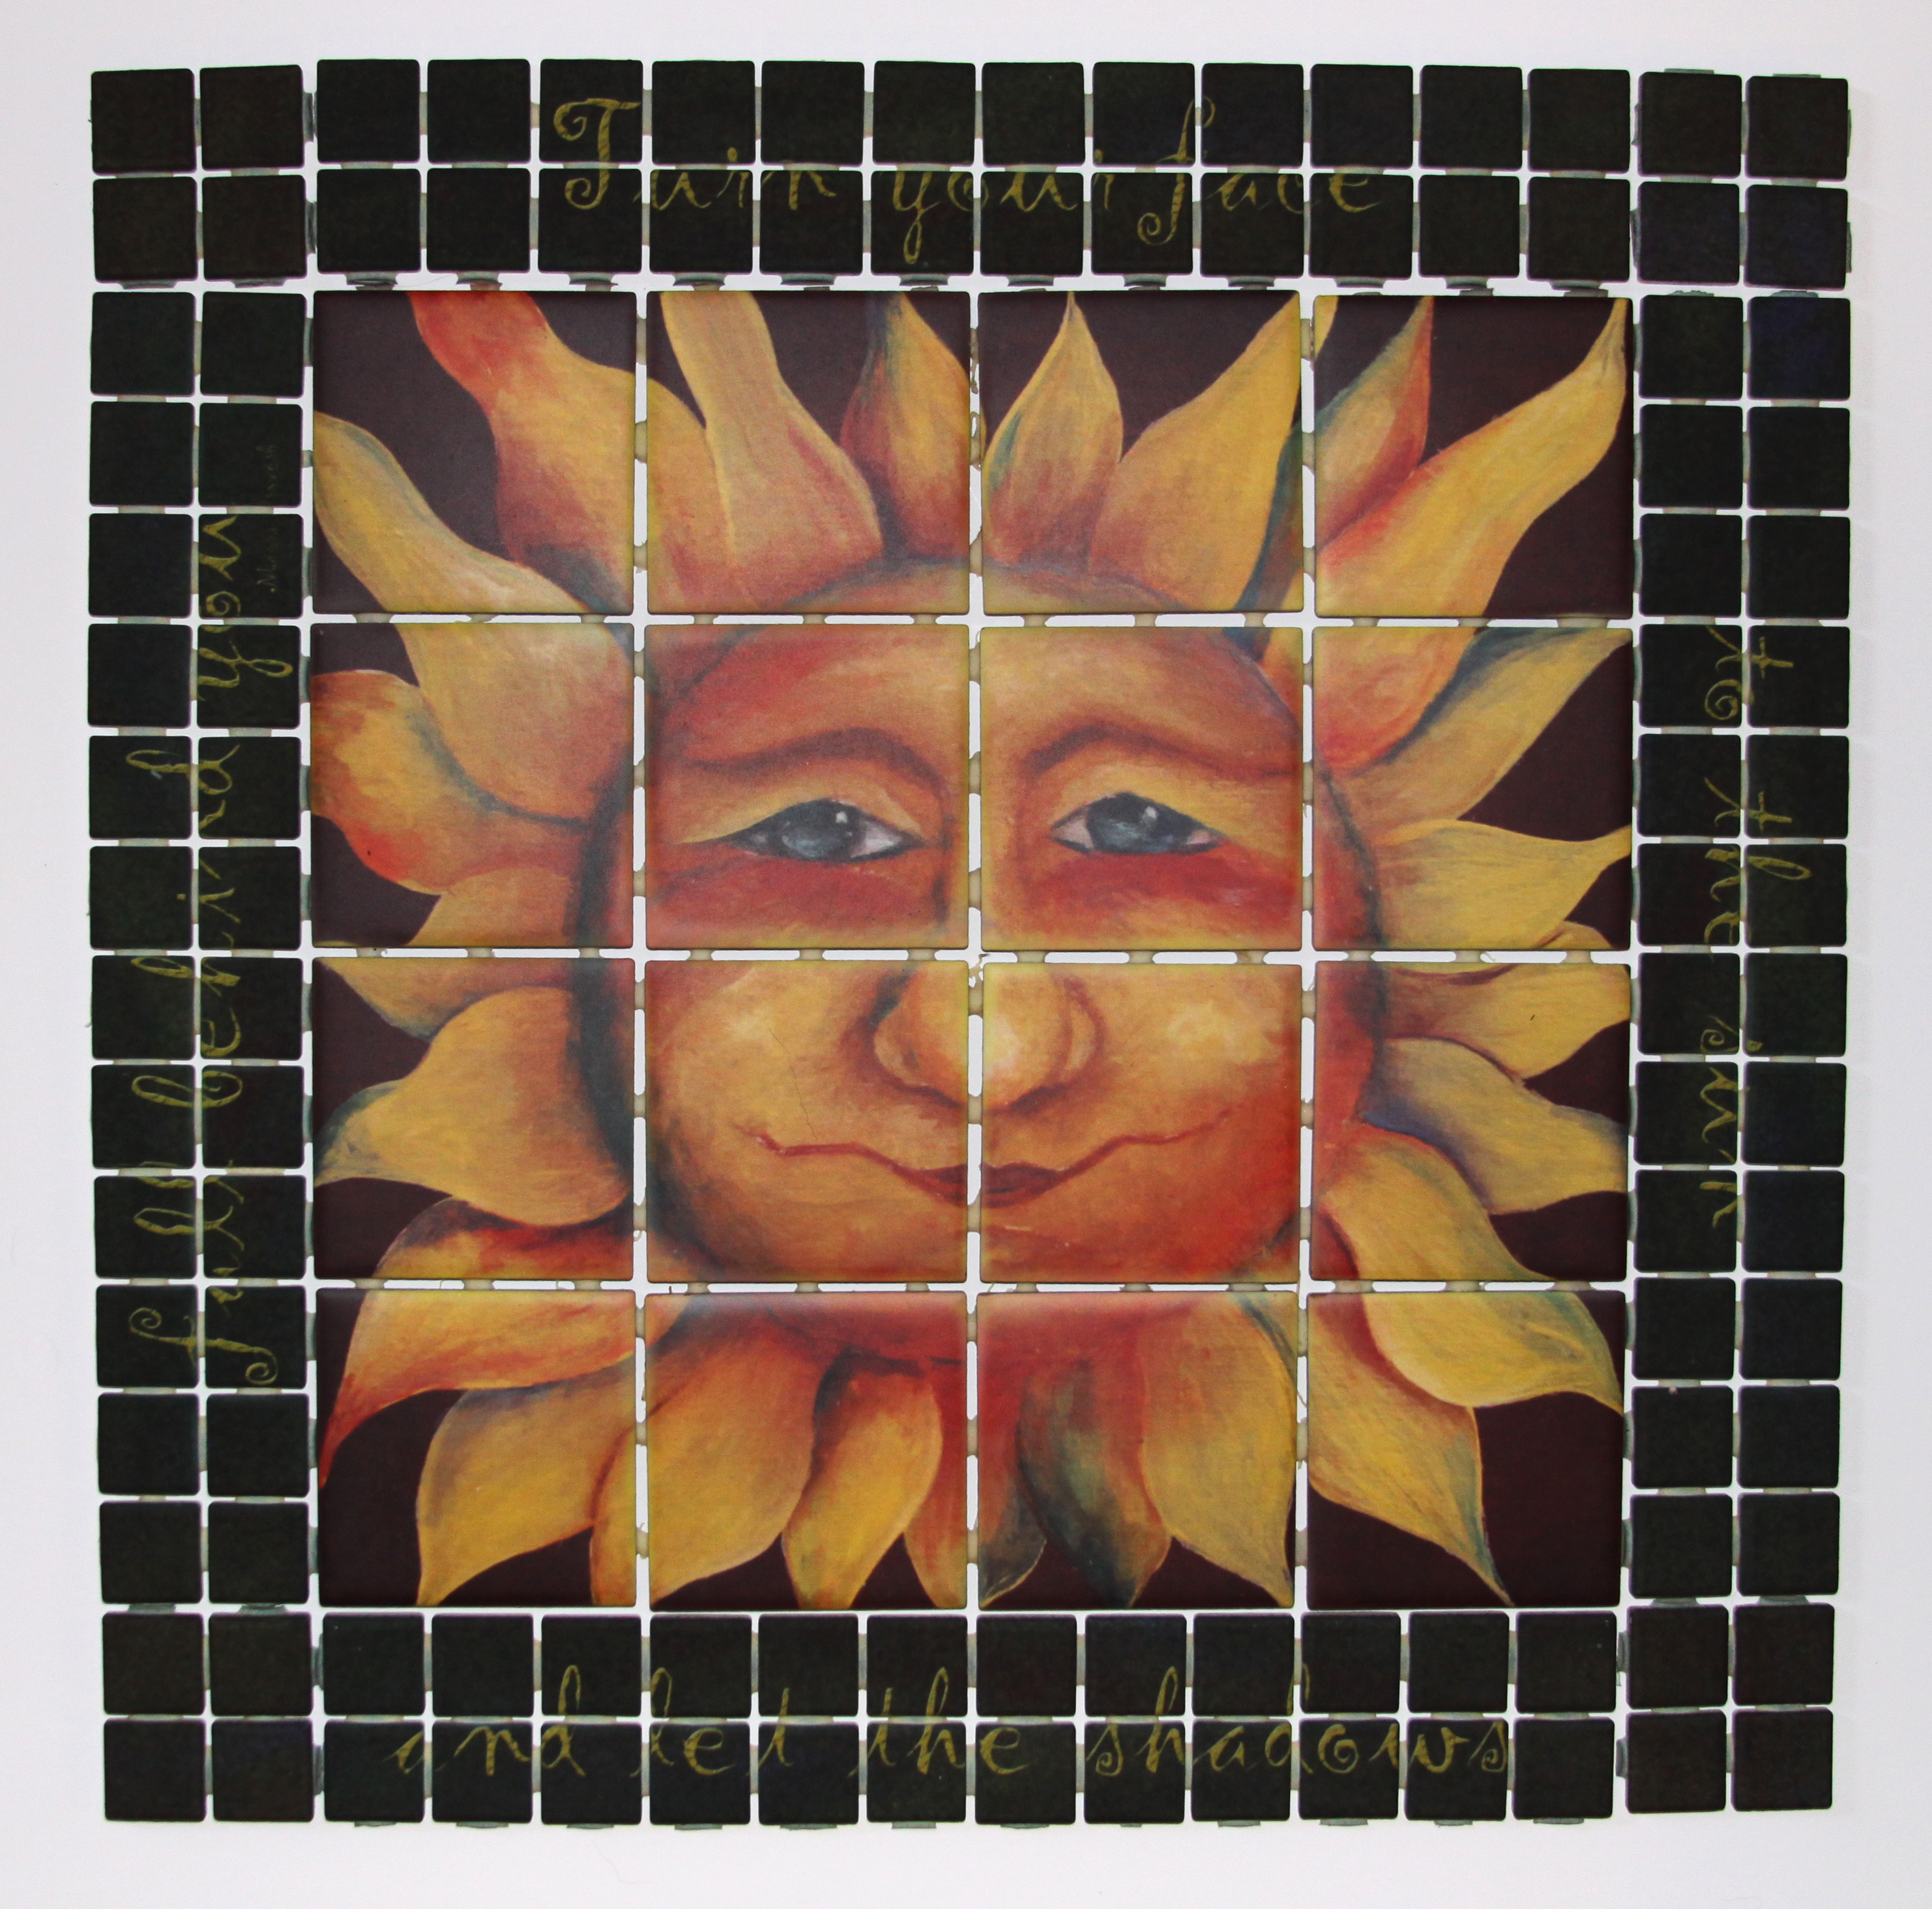 Turn Your Face To The Sun... made with sublimation printing